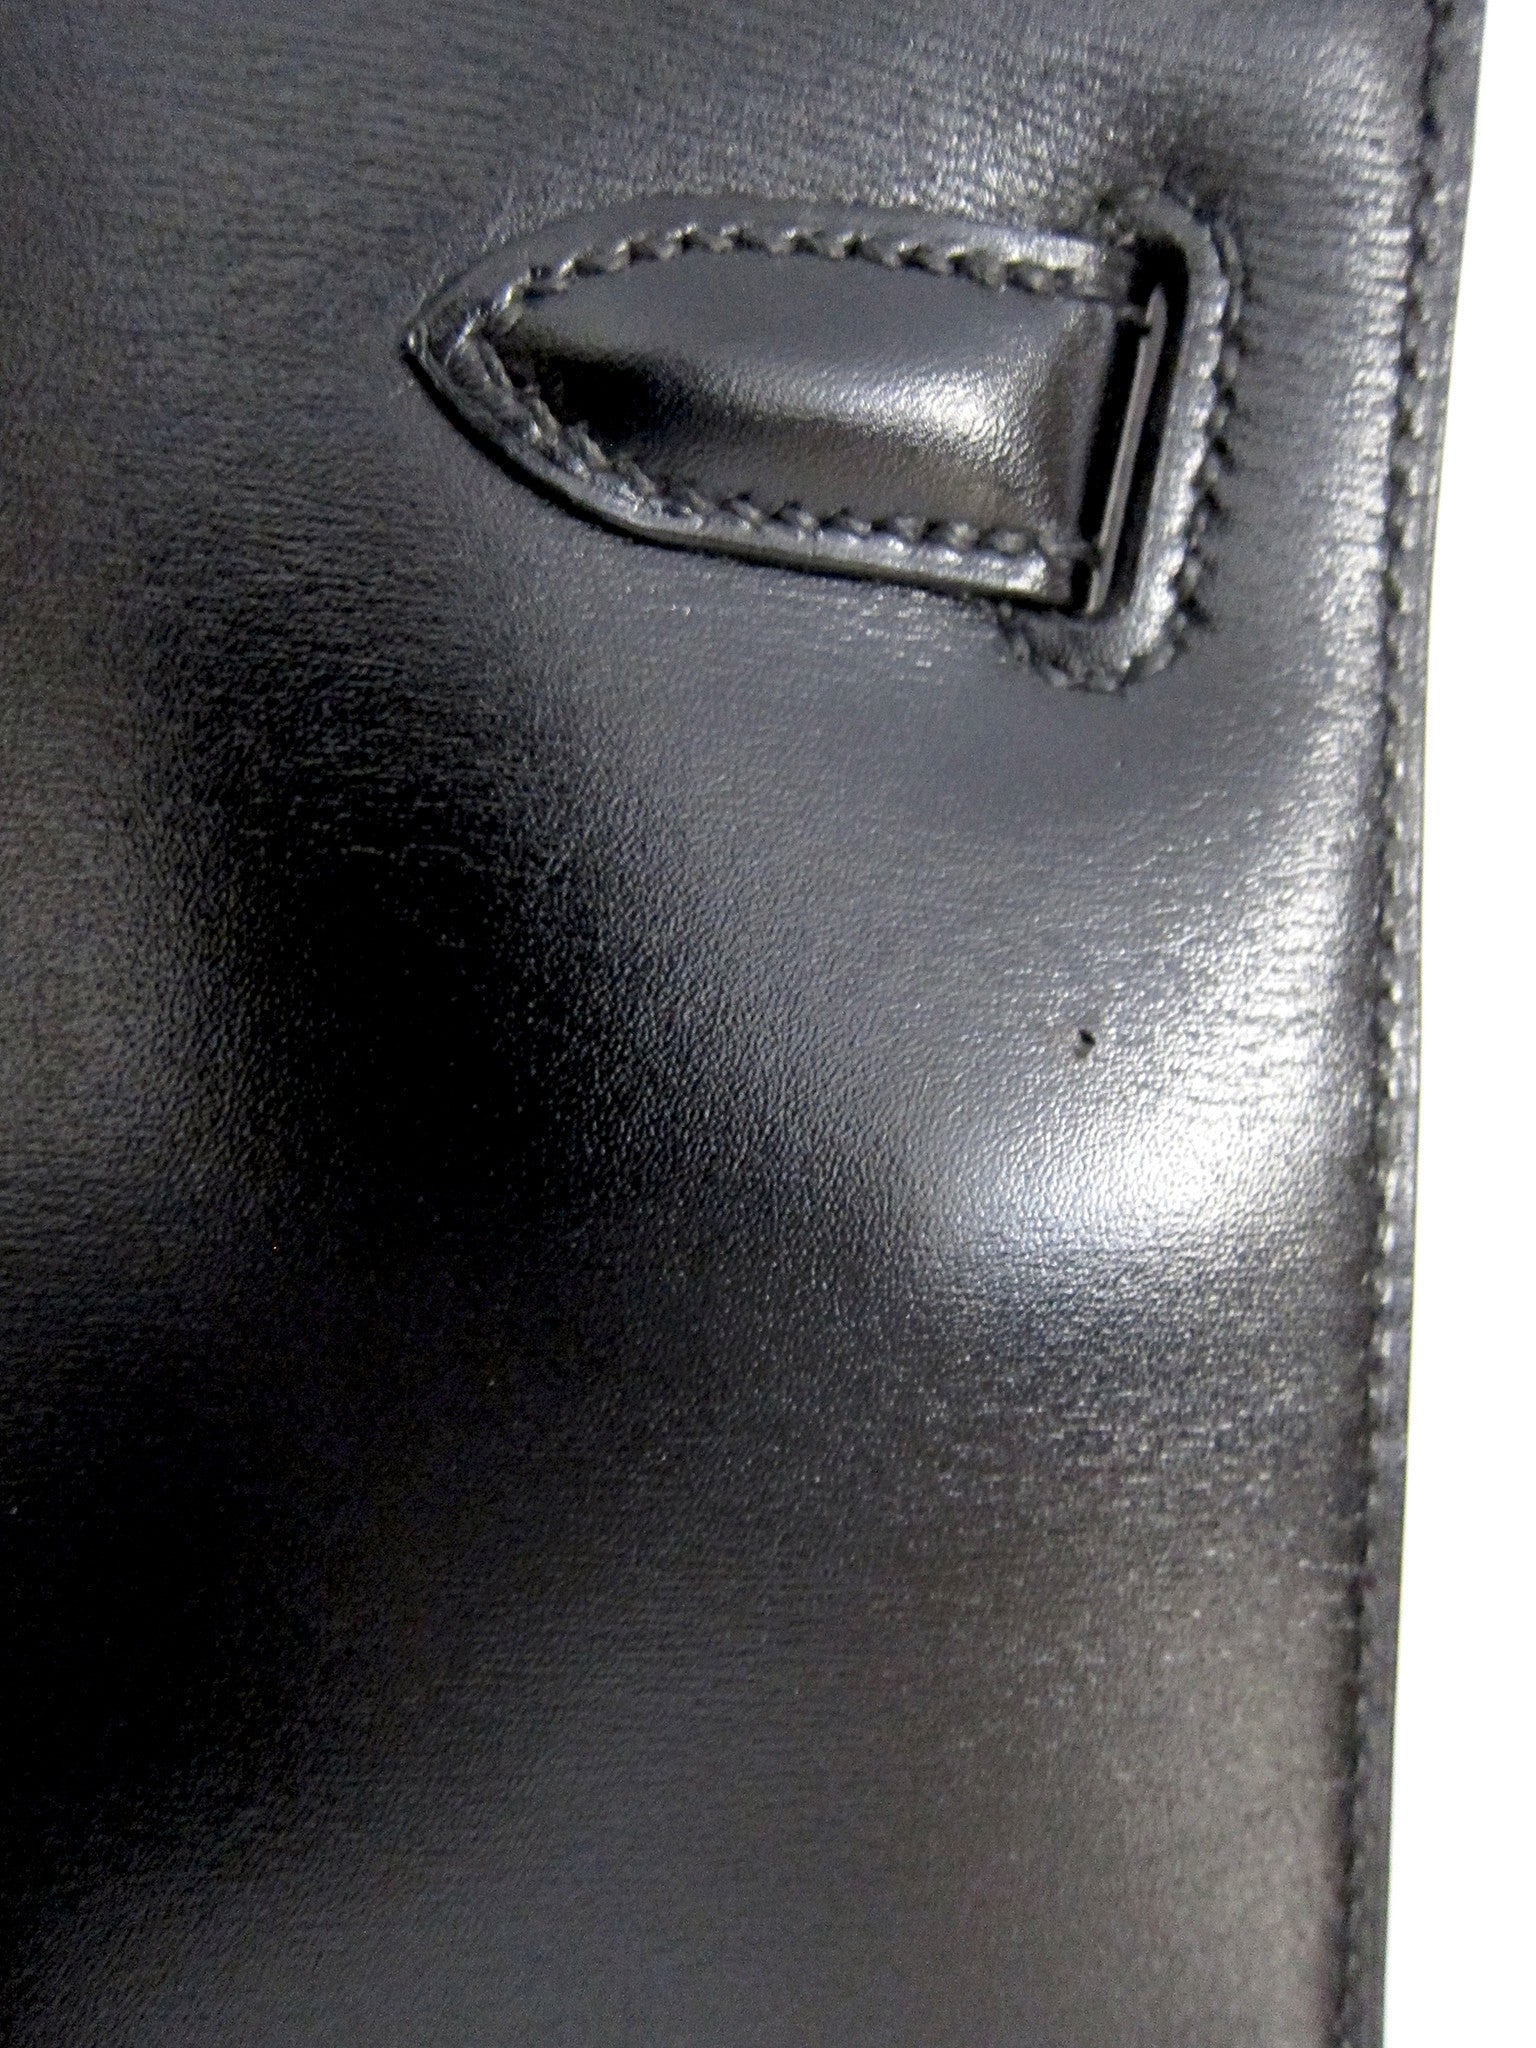 A BLACK CALF BOX LEATHER KELLY CUT WITH GOLD HARDWARE